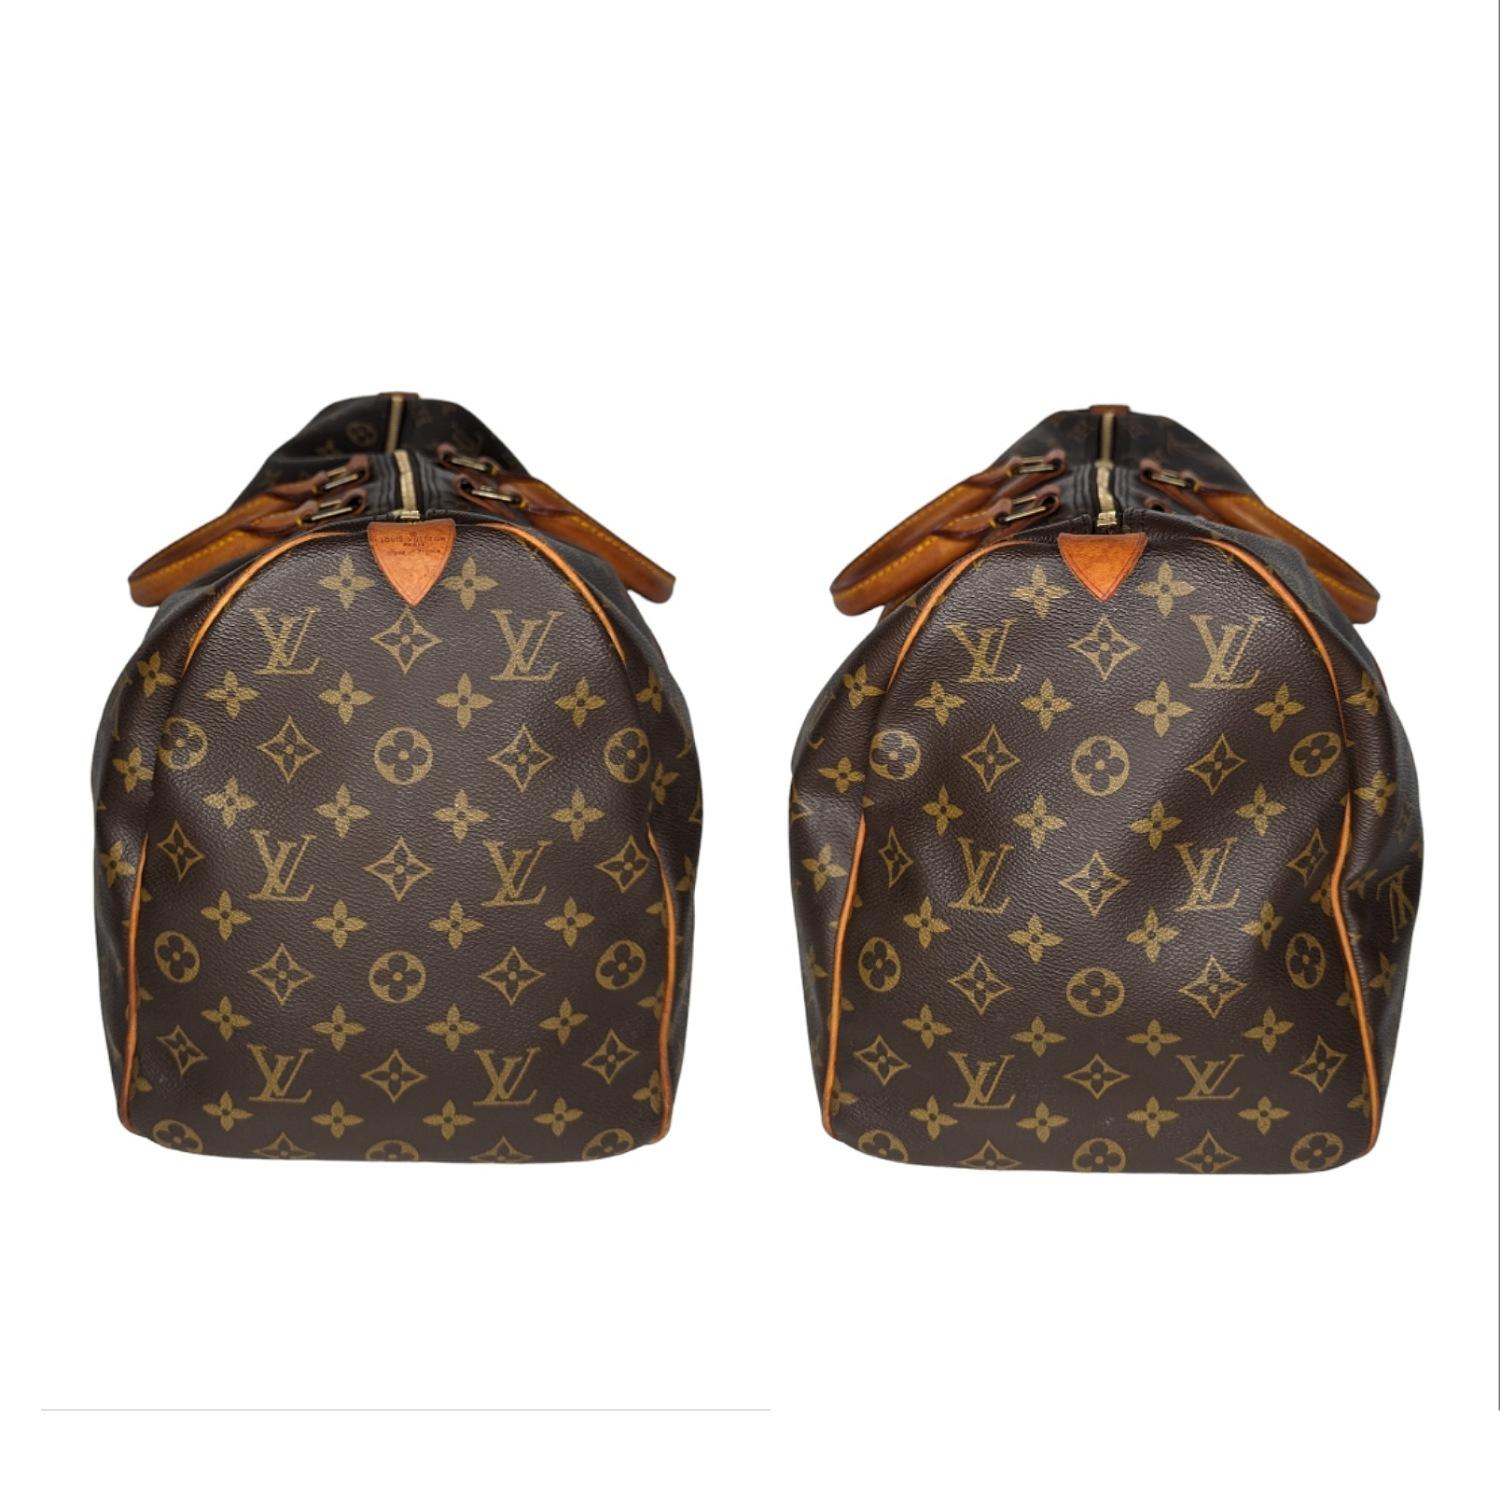 Louis Vuitton 1985 Monogram Canvas Keepall Bandouliere 45 In Good Condition For Sale In Scottsdale, AZ